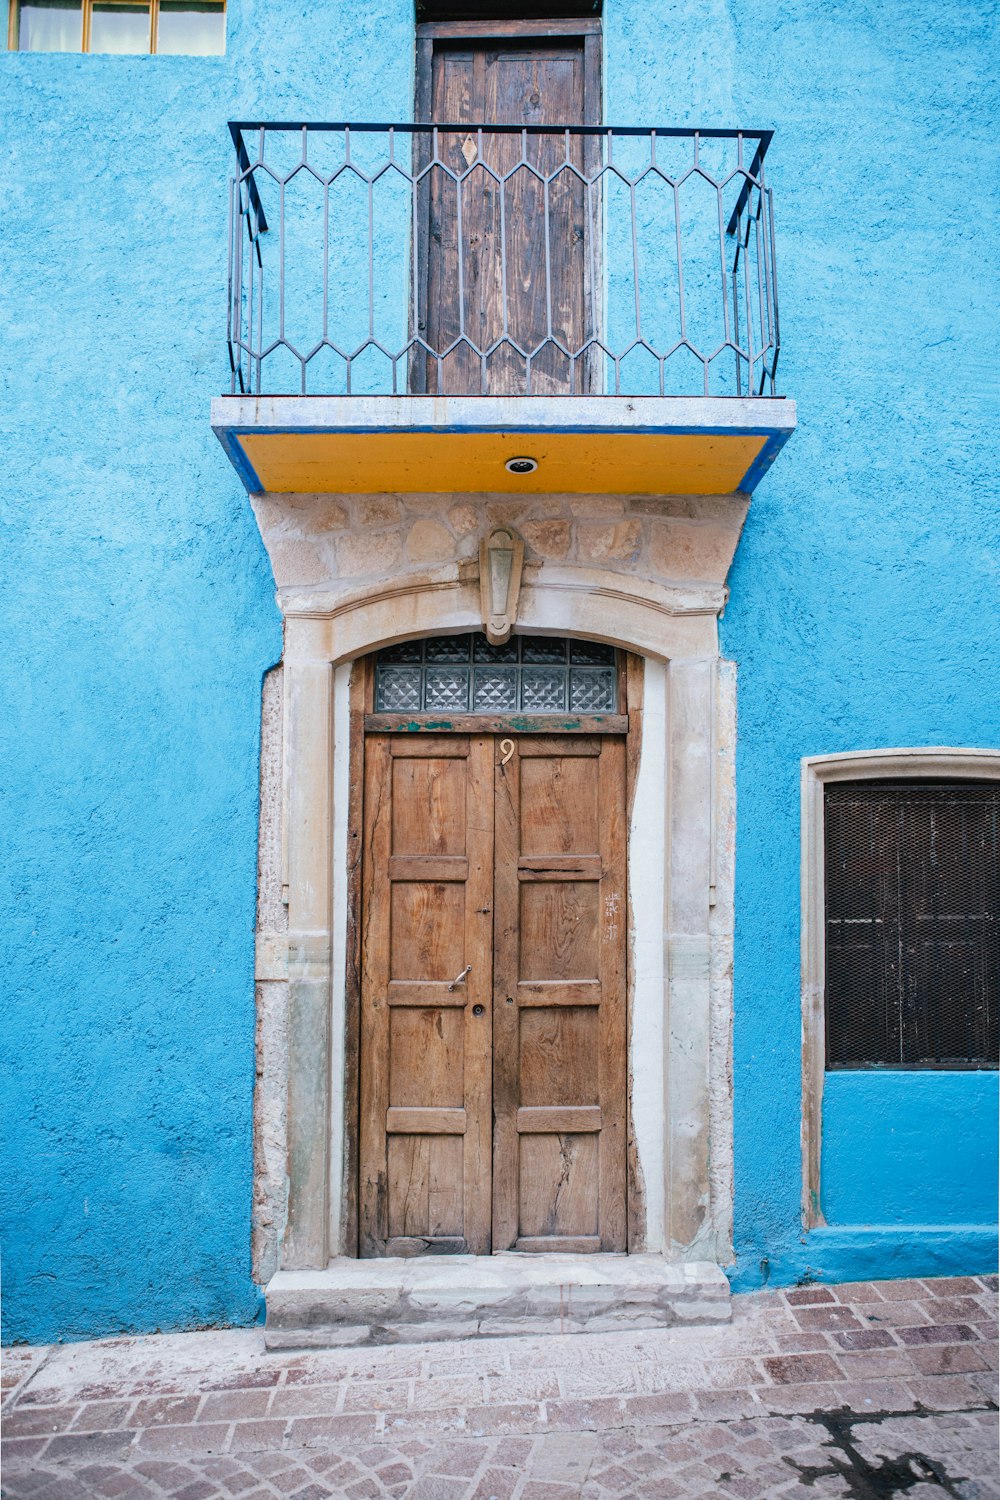 a blue building with a wooden door and balcony